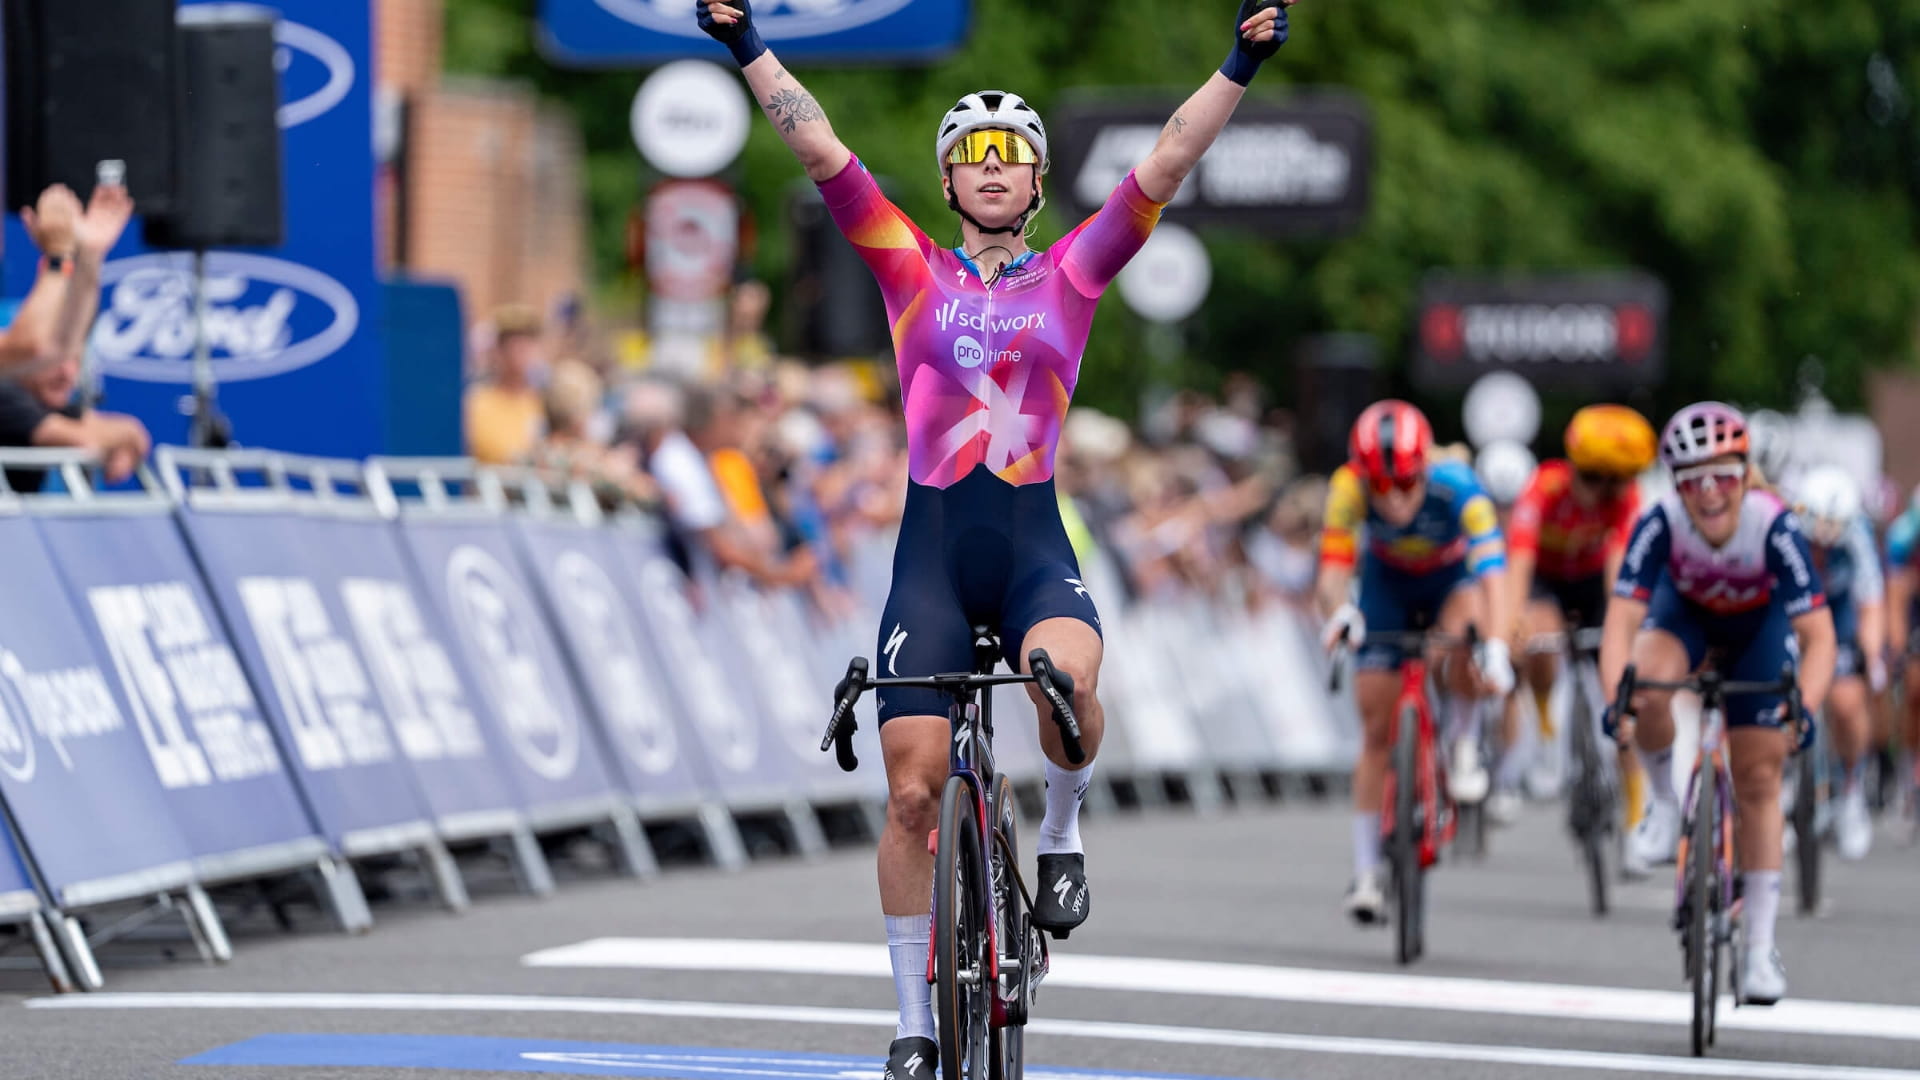 Lorena Wiebes (NED) of Team SD Worx Protime (NED) celebrates as she crosses the finish line to win Stage One of the Ford RideLondon Classique in Colchester on Friday 24th May 2024.